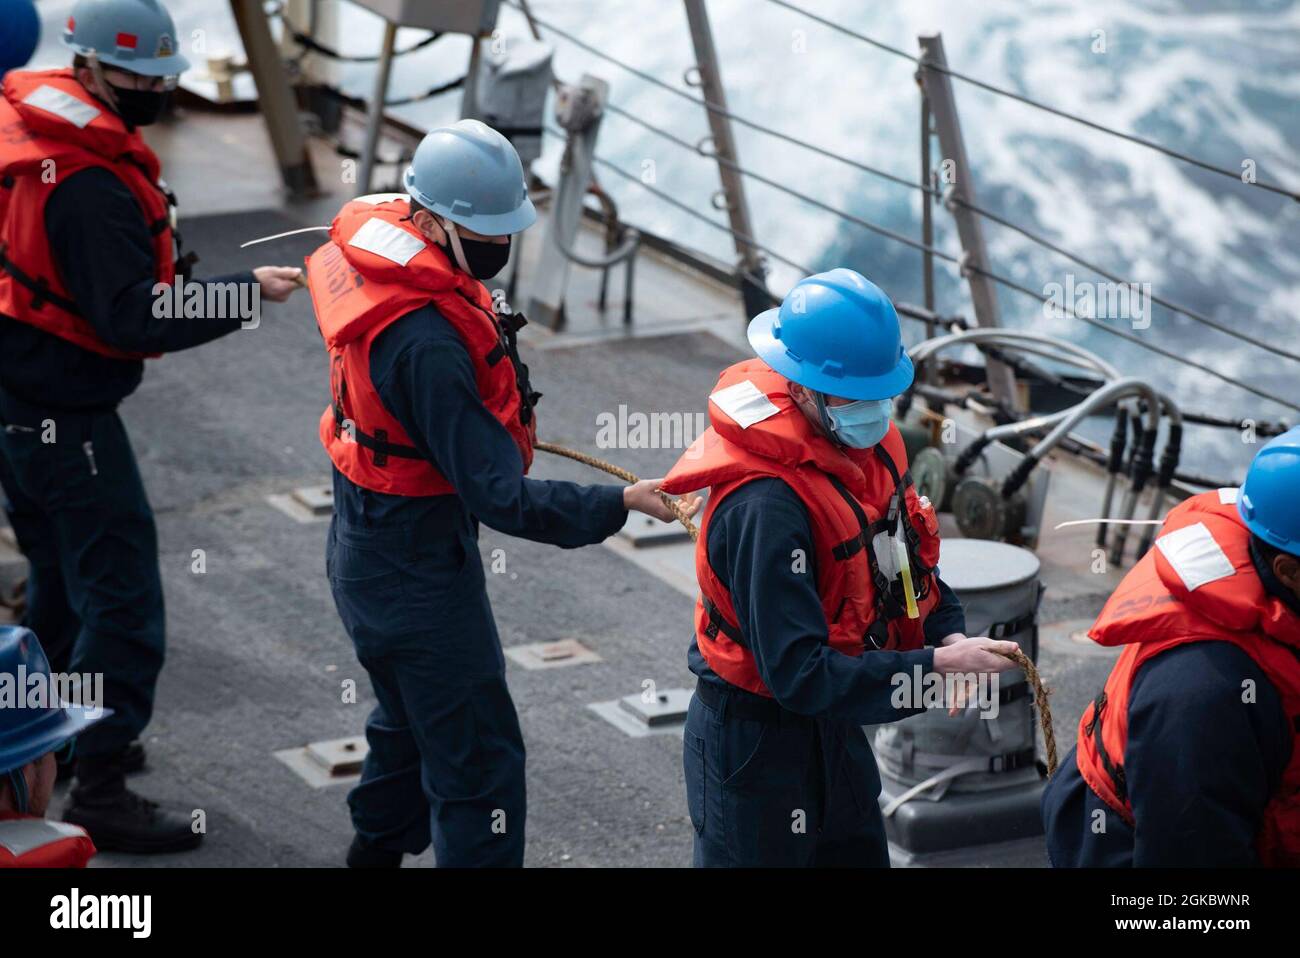 210307-N-QD512-1243 ATLANTIC OCEAN (March 7, 2021) Sailors heave in line aboard the Arleigh Burke-class guided-missile destroyer USS Mitscher (DDG 57) during a replenishment-at-sea with the Supply-class fast combat supply support ship USNS Arctic (T-AOE 8), March 7, 2021. Mitscher is operating with the Ike Carrier Strike Group on a routine deployment in the U.S. Sixth Fleet area of operations in support of U.S. national interests and security in Europe and Africa. Stock Photo